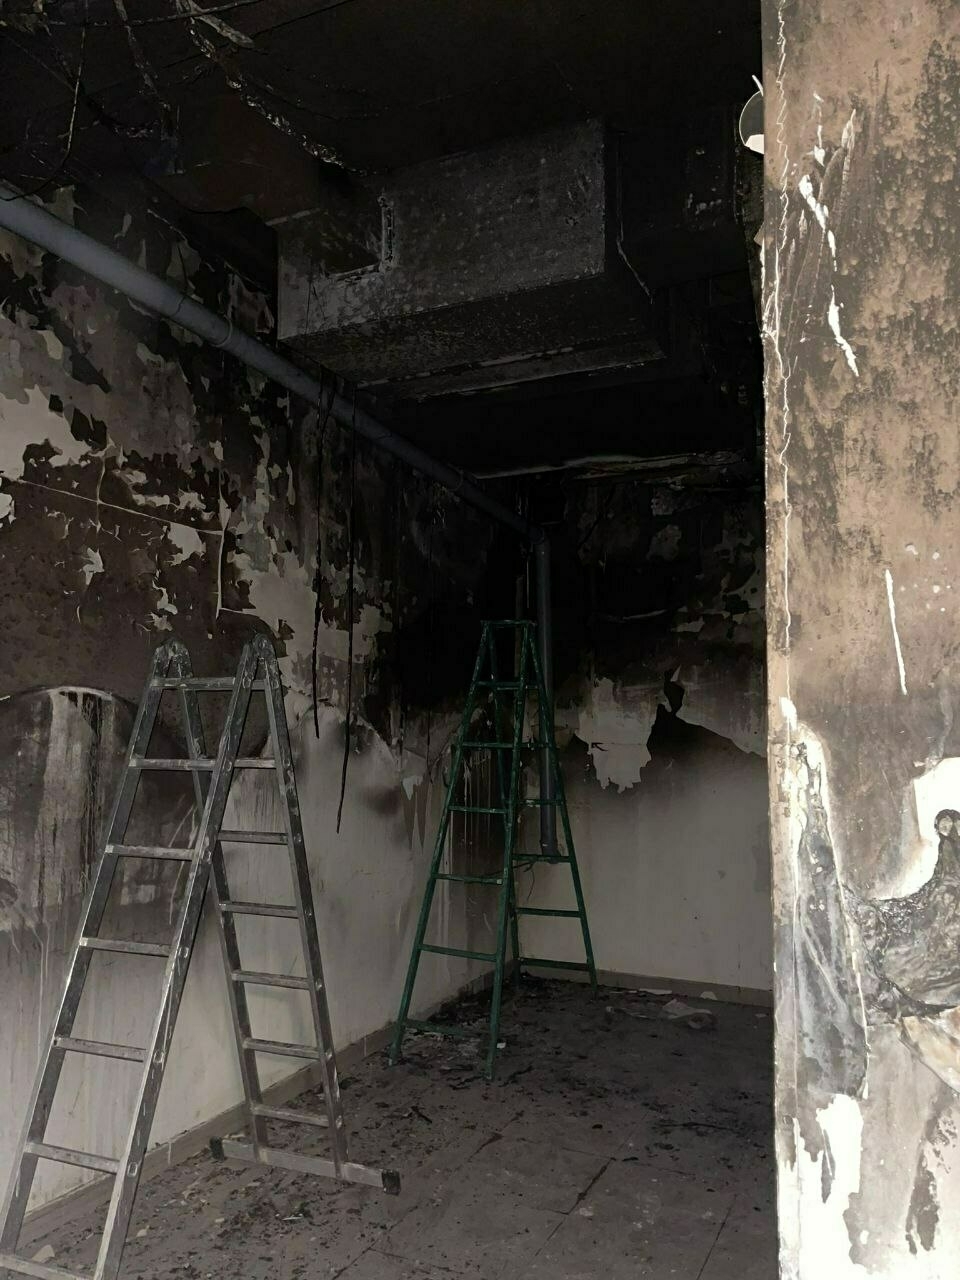 small room with fire damage on the ceiling and upper half of the walls, which are black